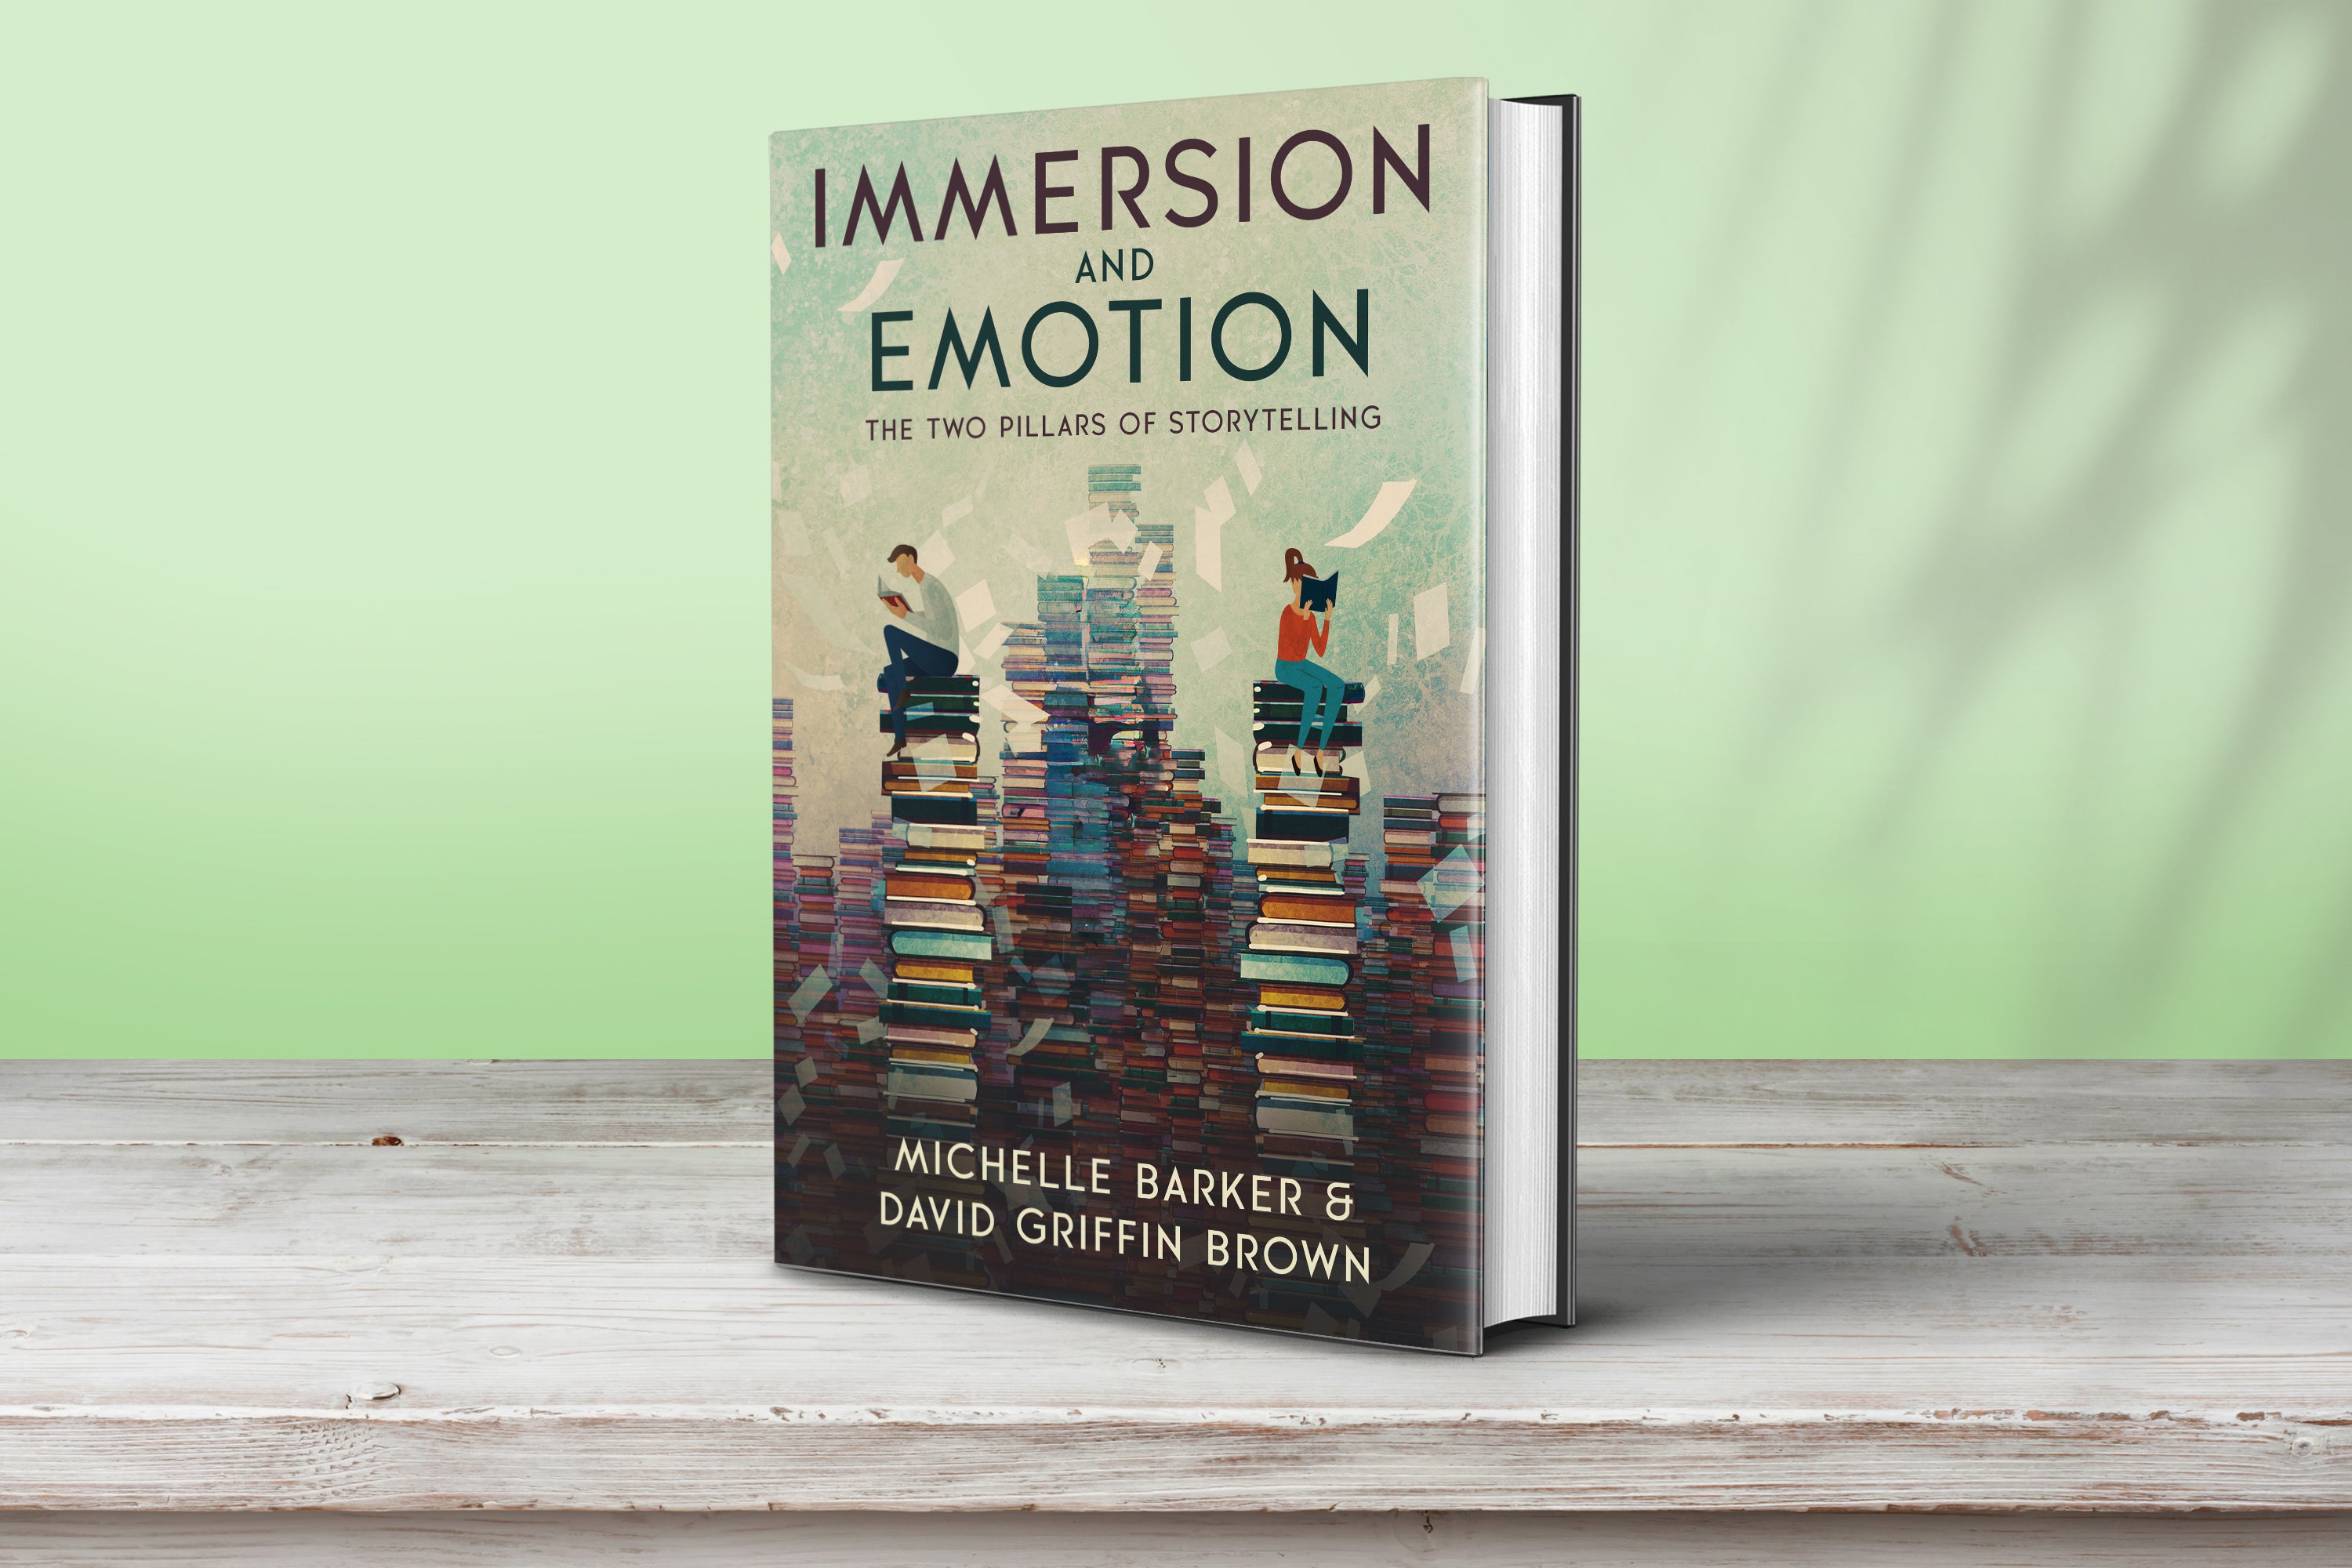 Immersion & Emotion is now available for pre-order